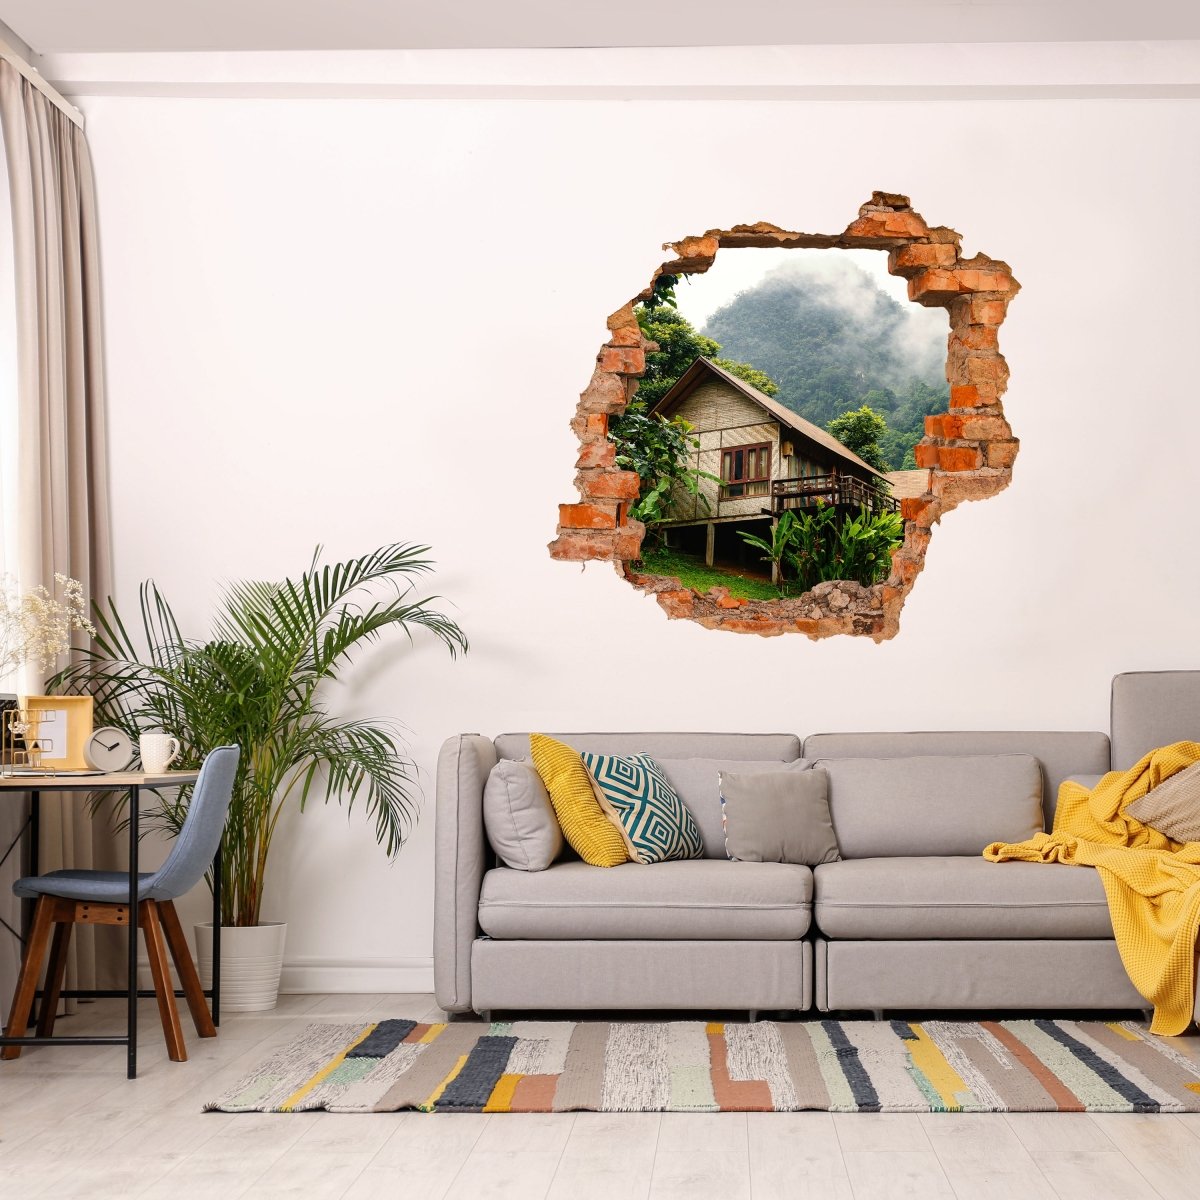 3D wall sticker hut in the mountains, jungle, palm trees - Wall Decal M1226